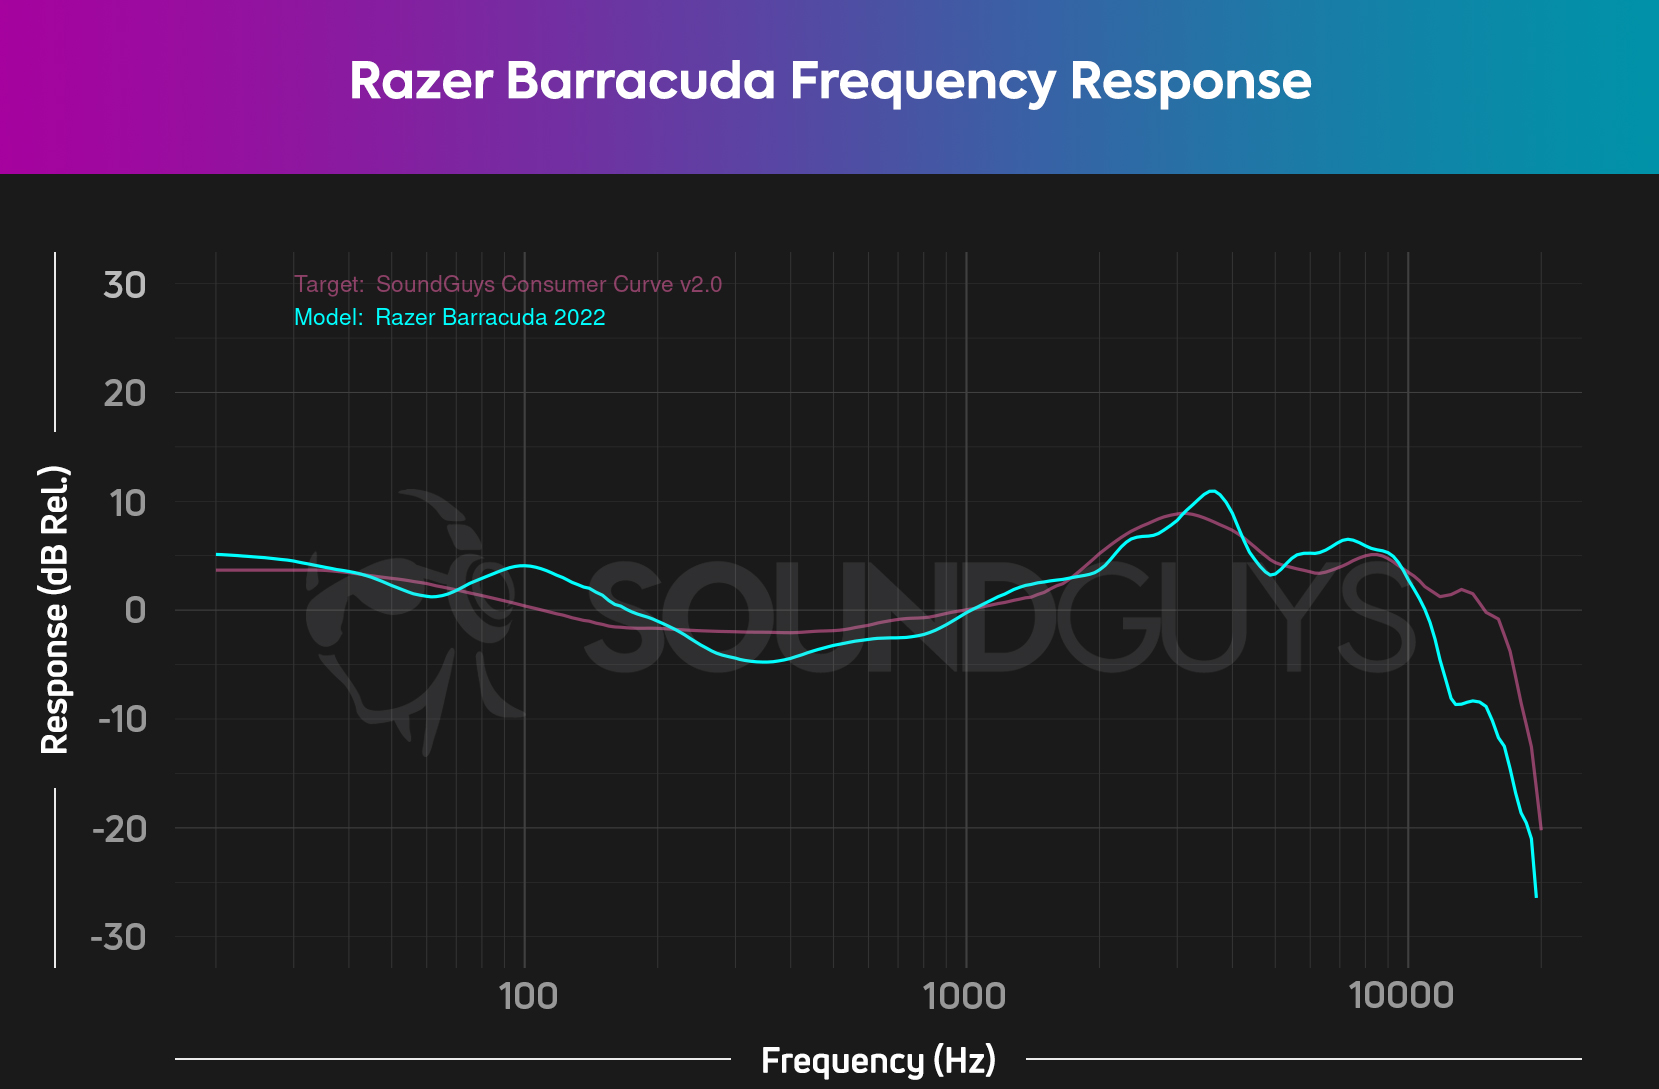 A frequency response chart for the Razer Barracuda gaming headset, which shows a notable increase in upper bass output, and an underemphasis in lower midrange output.